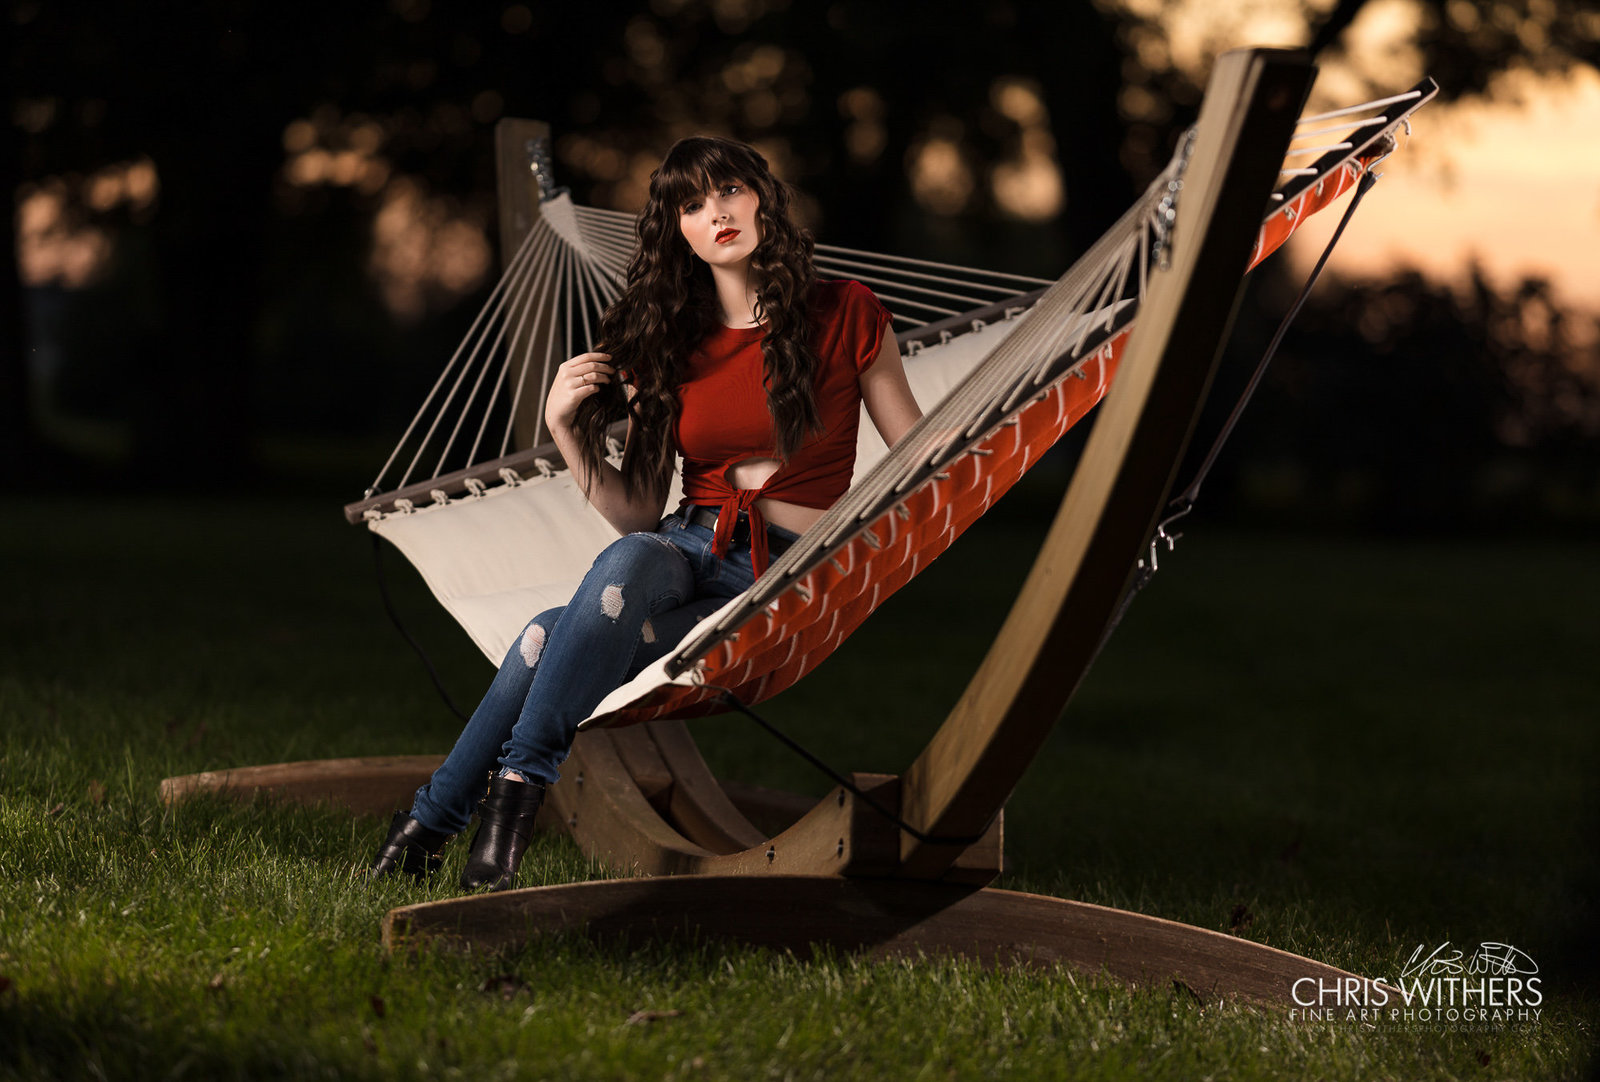 Springfield Illinois Senior Photographer - Chris Withers Photography (8 of 9)